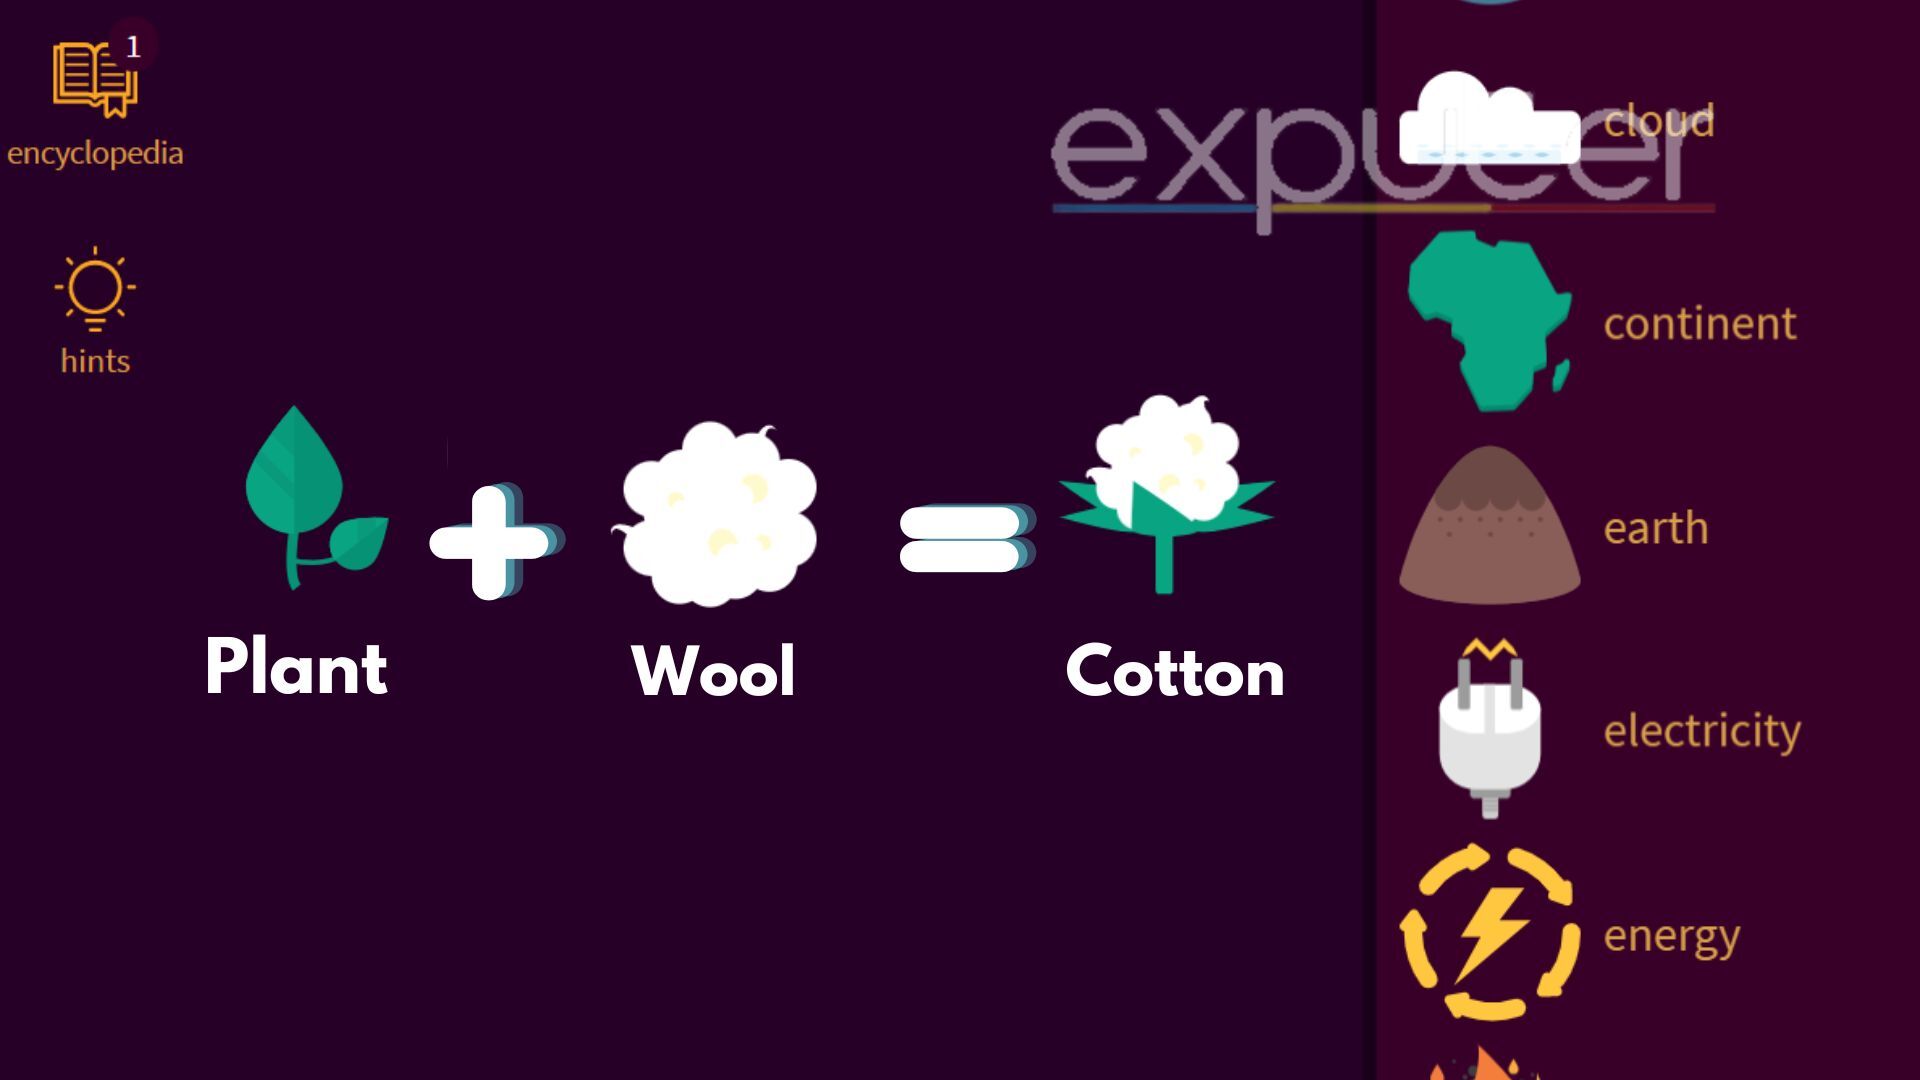 Combine Plant and Wool for the element 